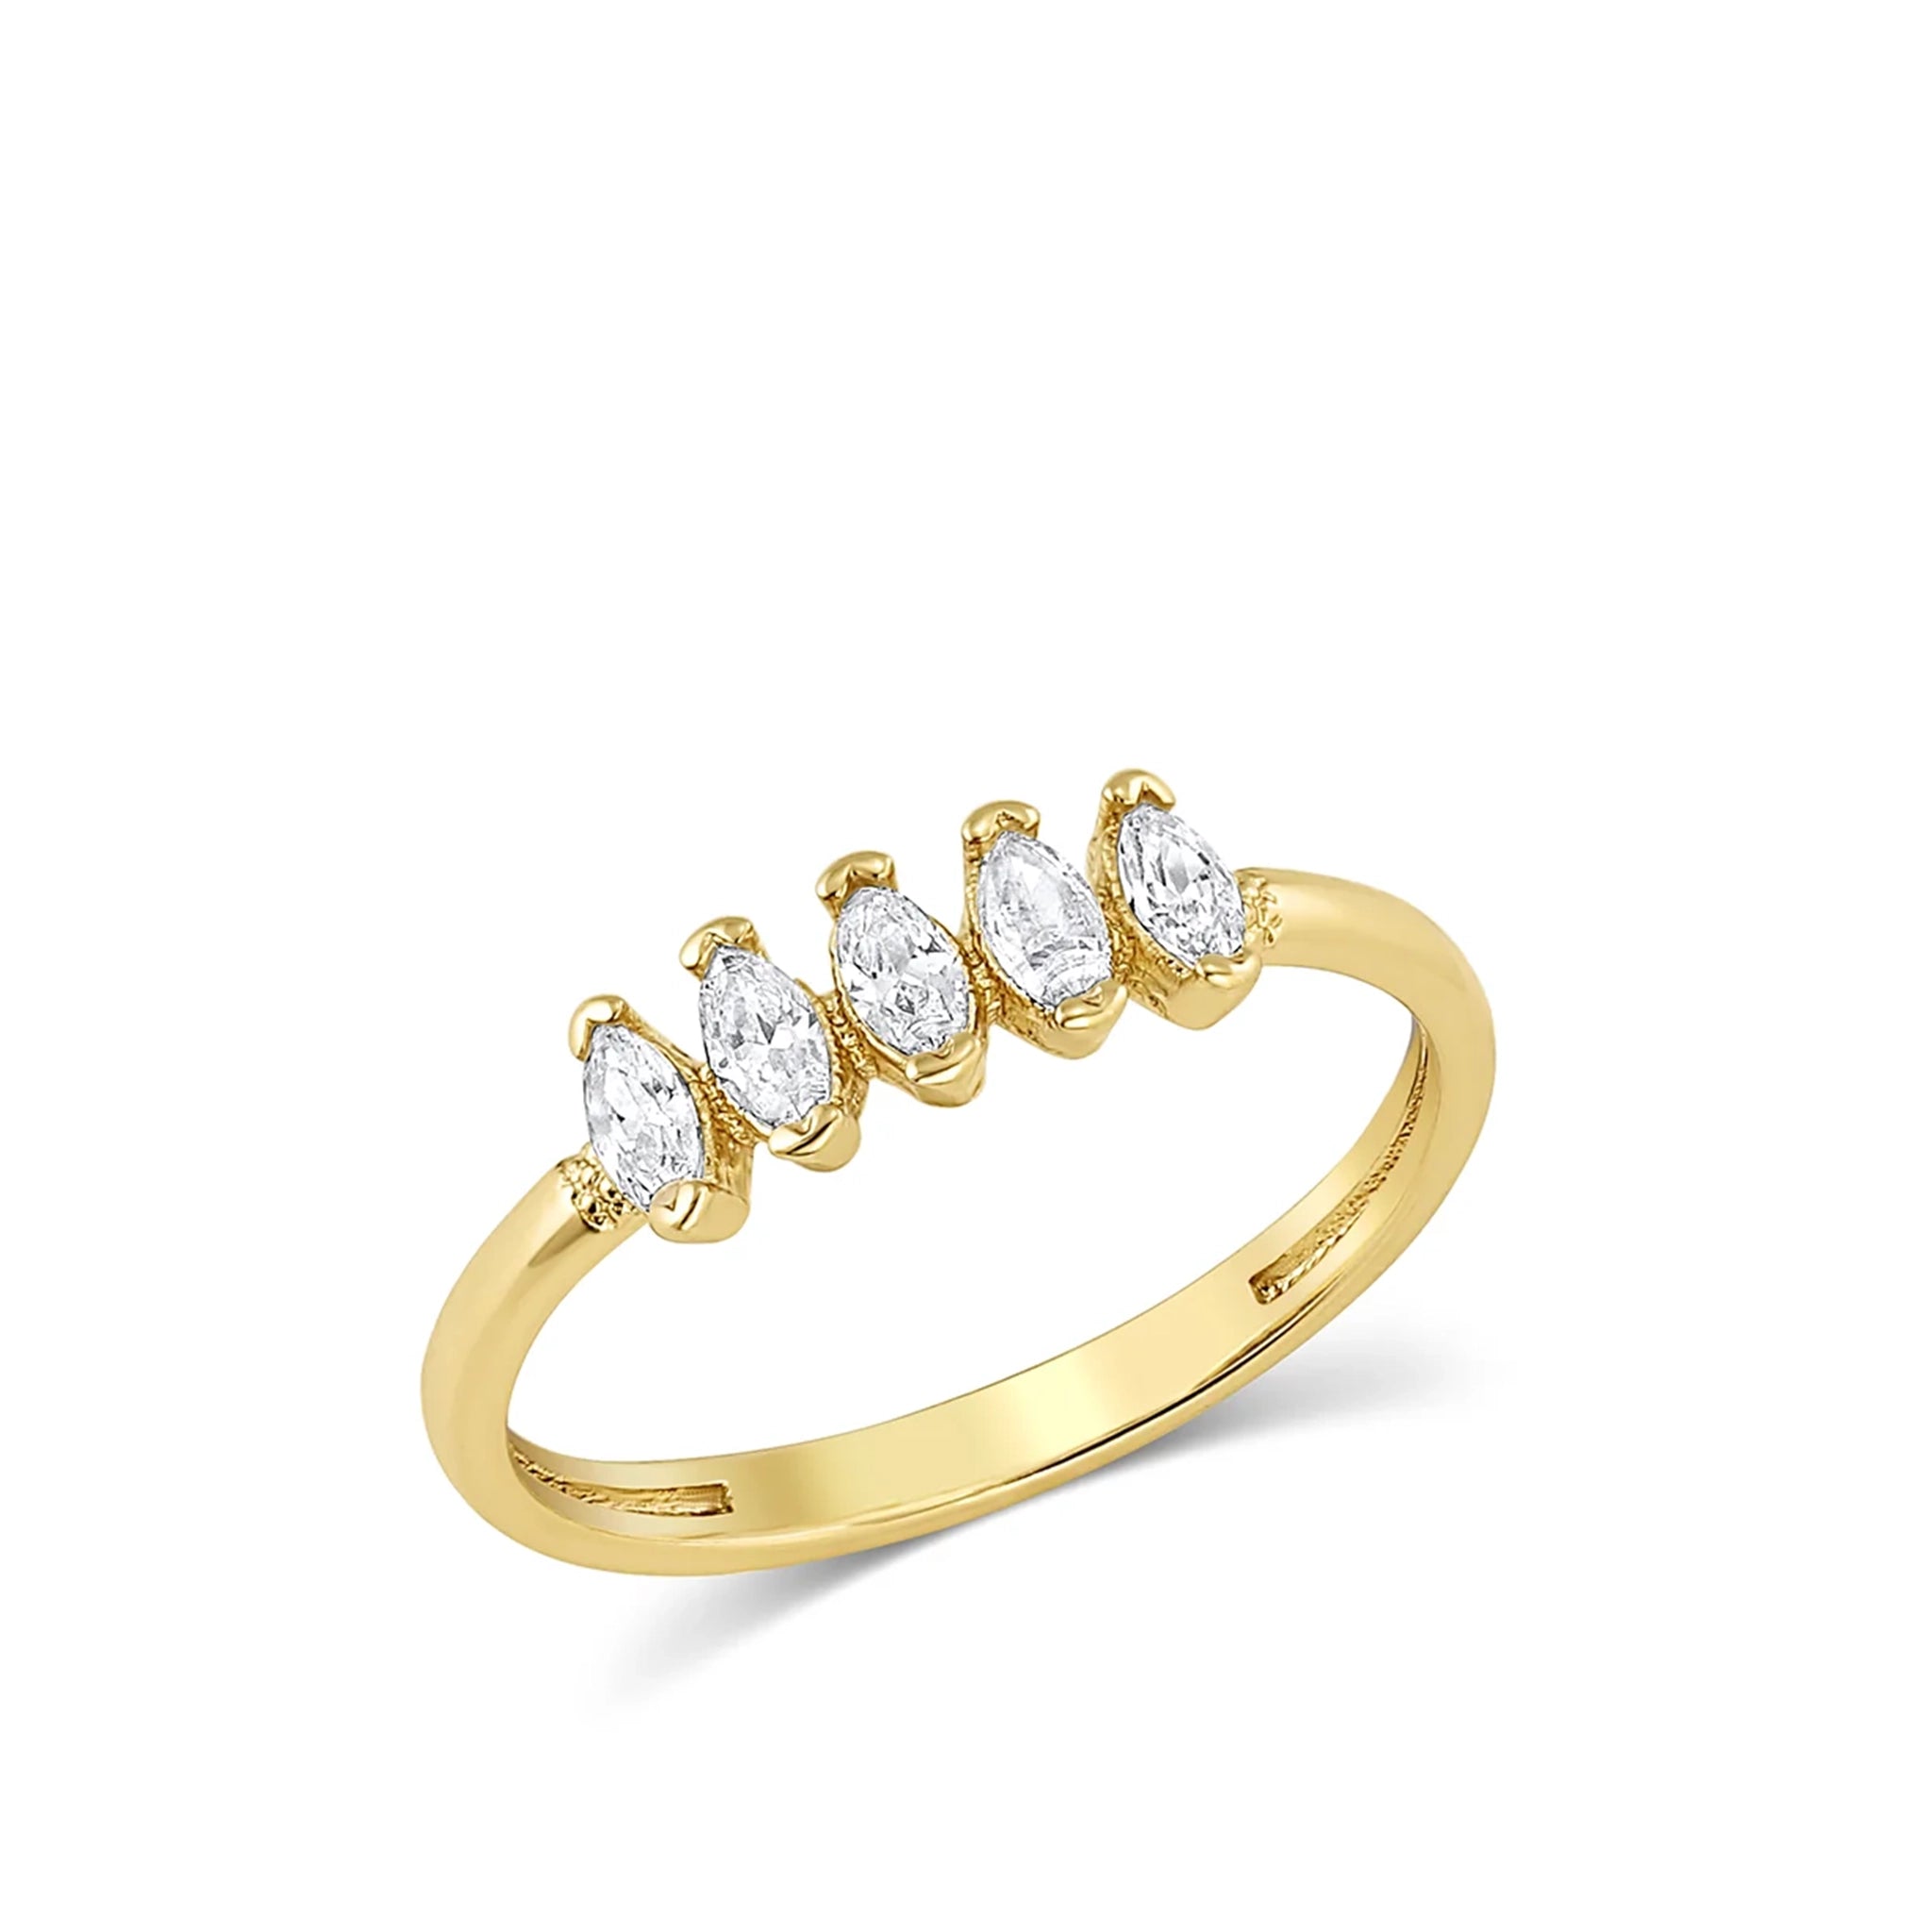 The Cooper Ring is a thin gold band with 5 cz diamonds stacked next to one another across the top.